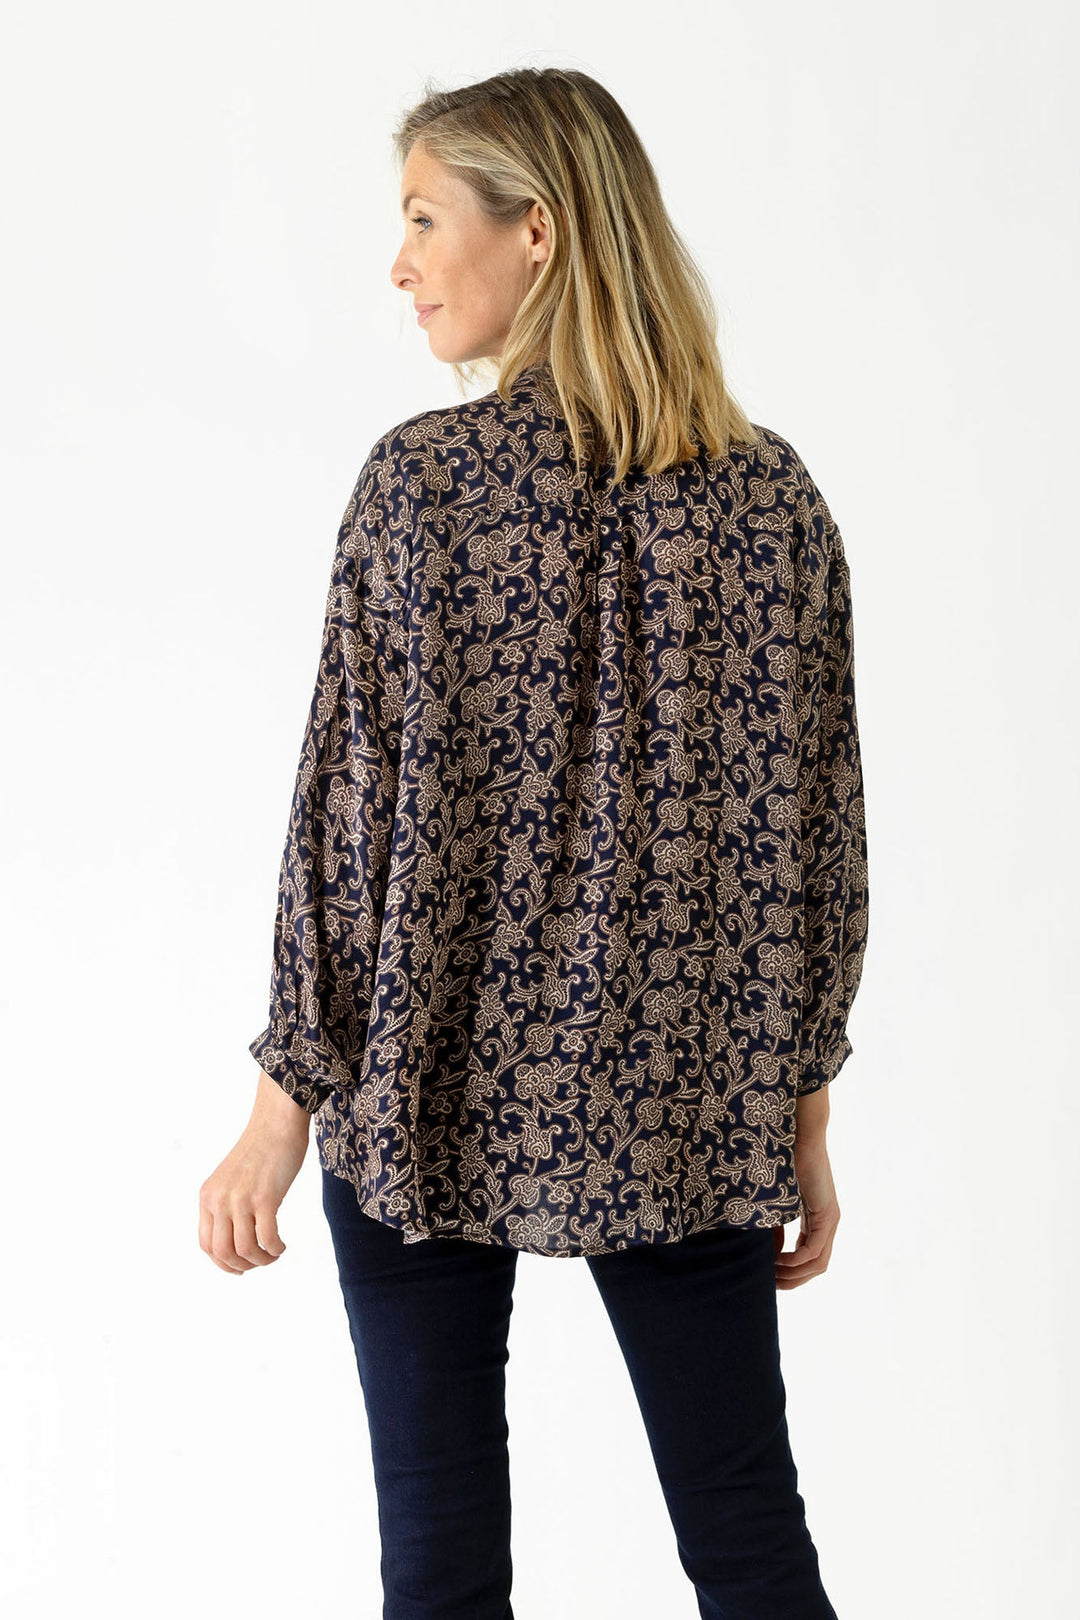 Floral Paisley Blue Darcy Shirt - One Hundred Stars